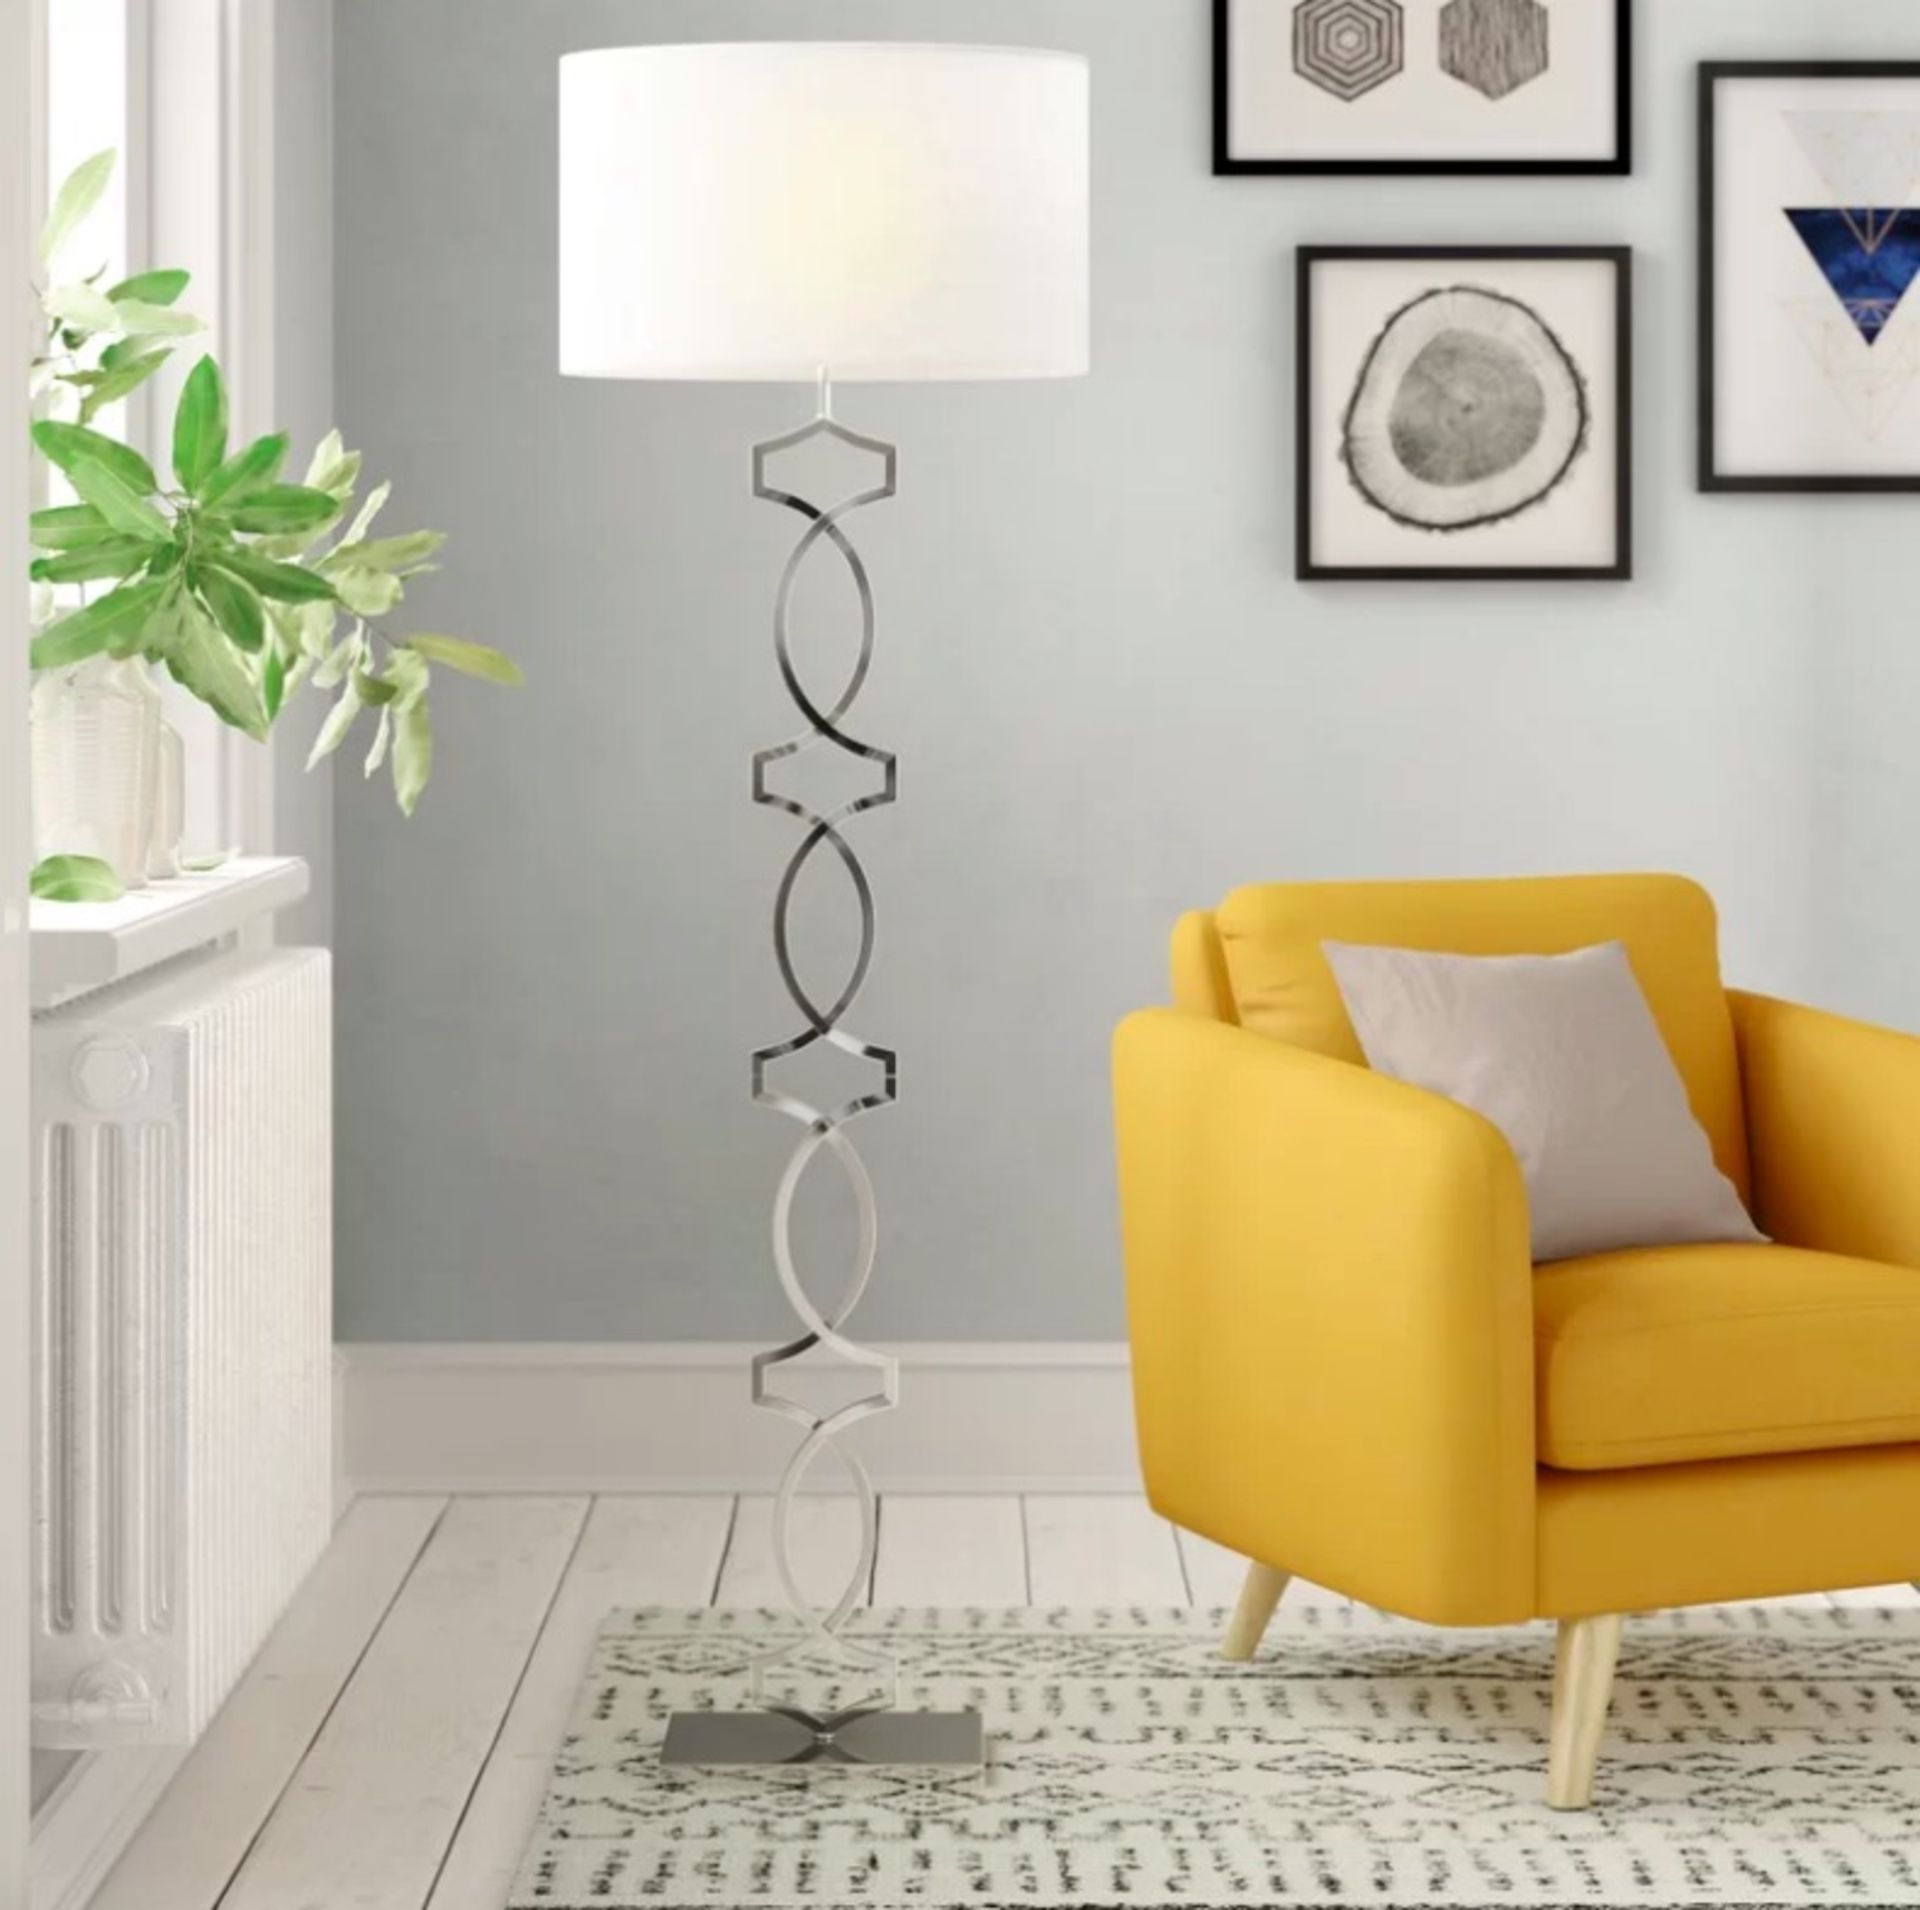 Geo 158cm Floor Lamp Add Interest To A Forgotten Corner Or Create A Welcoming Feature In Your